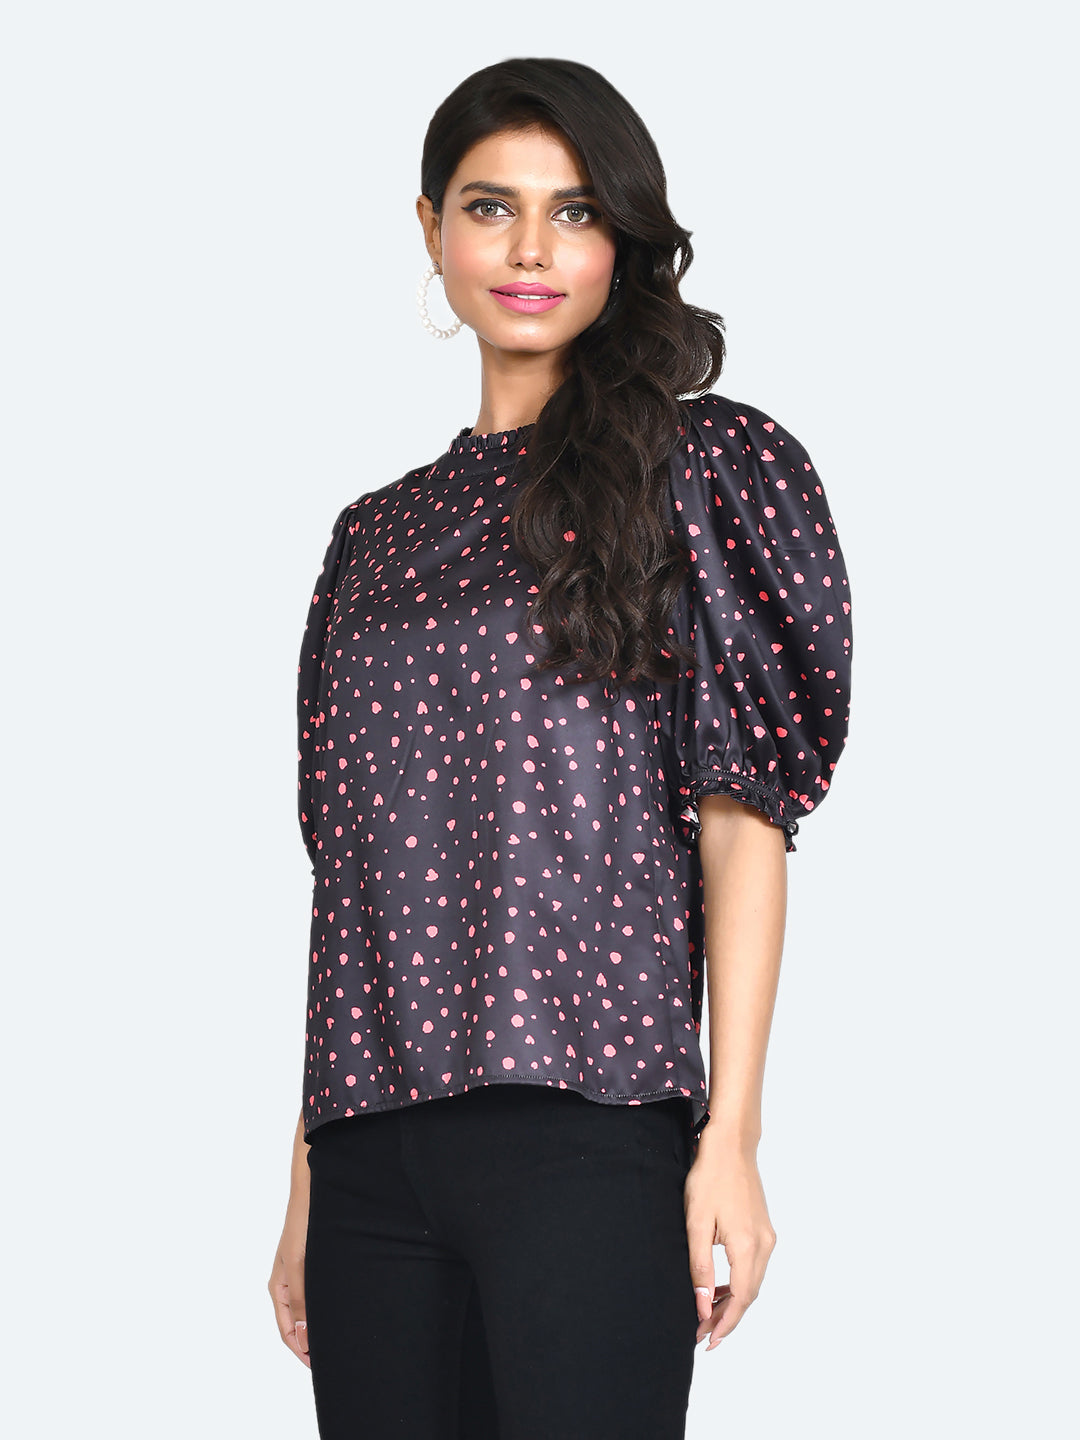 Black Printed Frill Top For Women